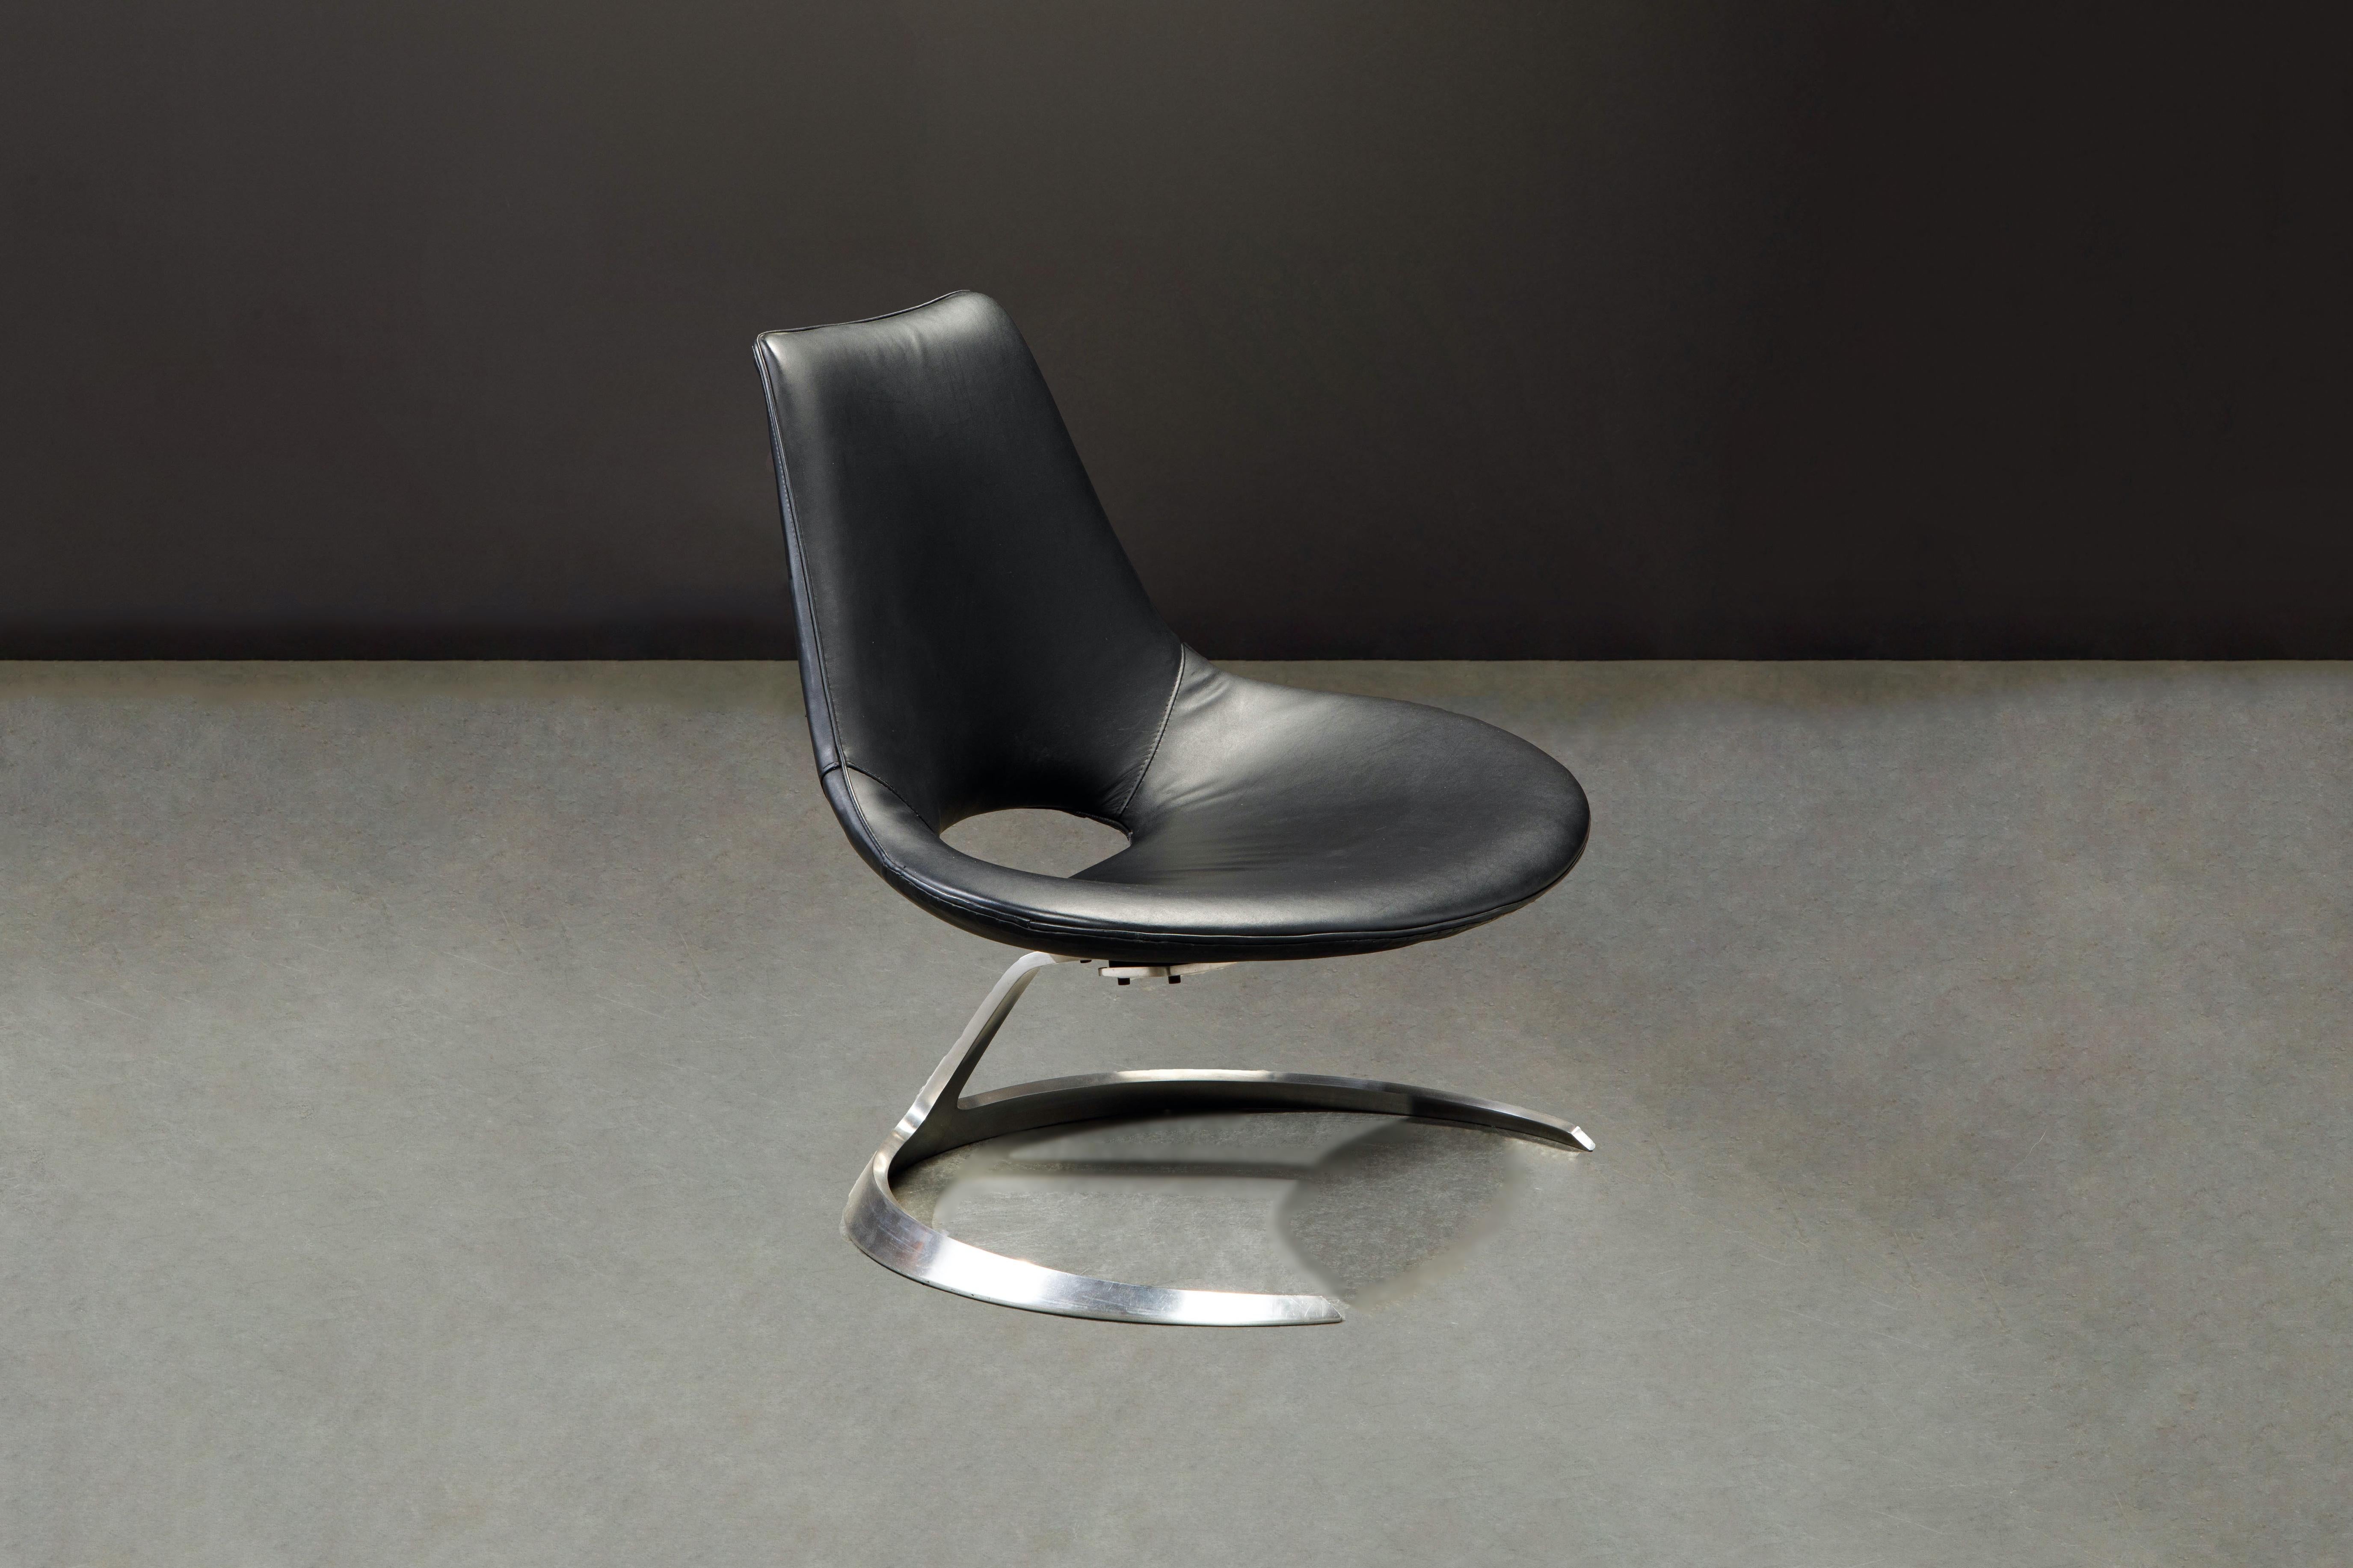 Stainless Steel 'Scimitar' Chair by Fabricius & Kastholm for Ivan Schlecter, Signed, 1960s